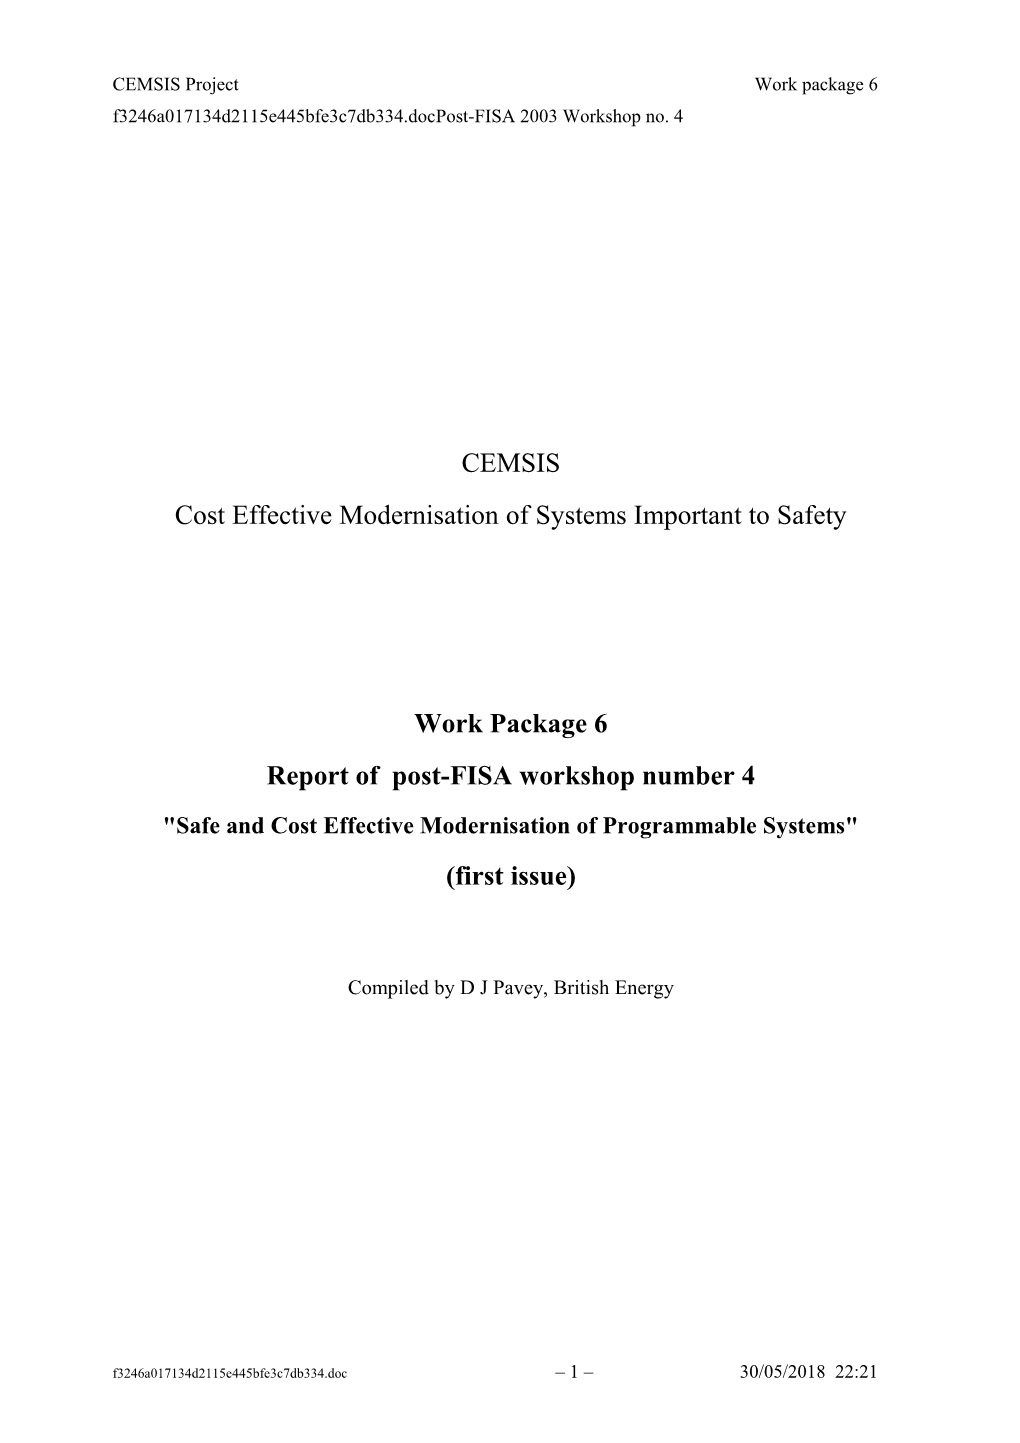 CEMSIS Project Work Package 6